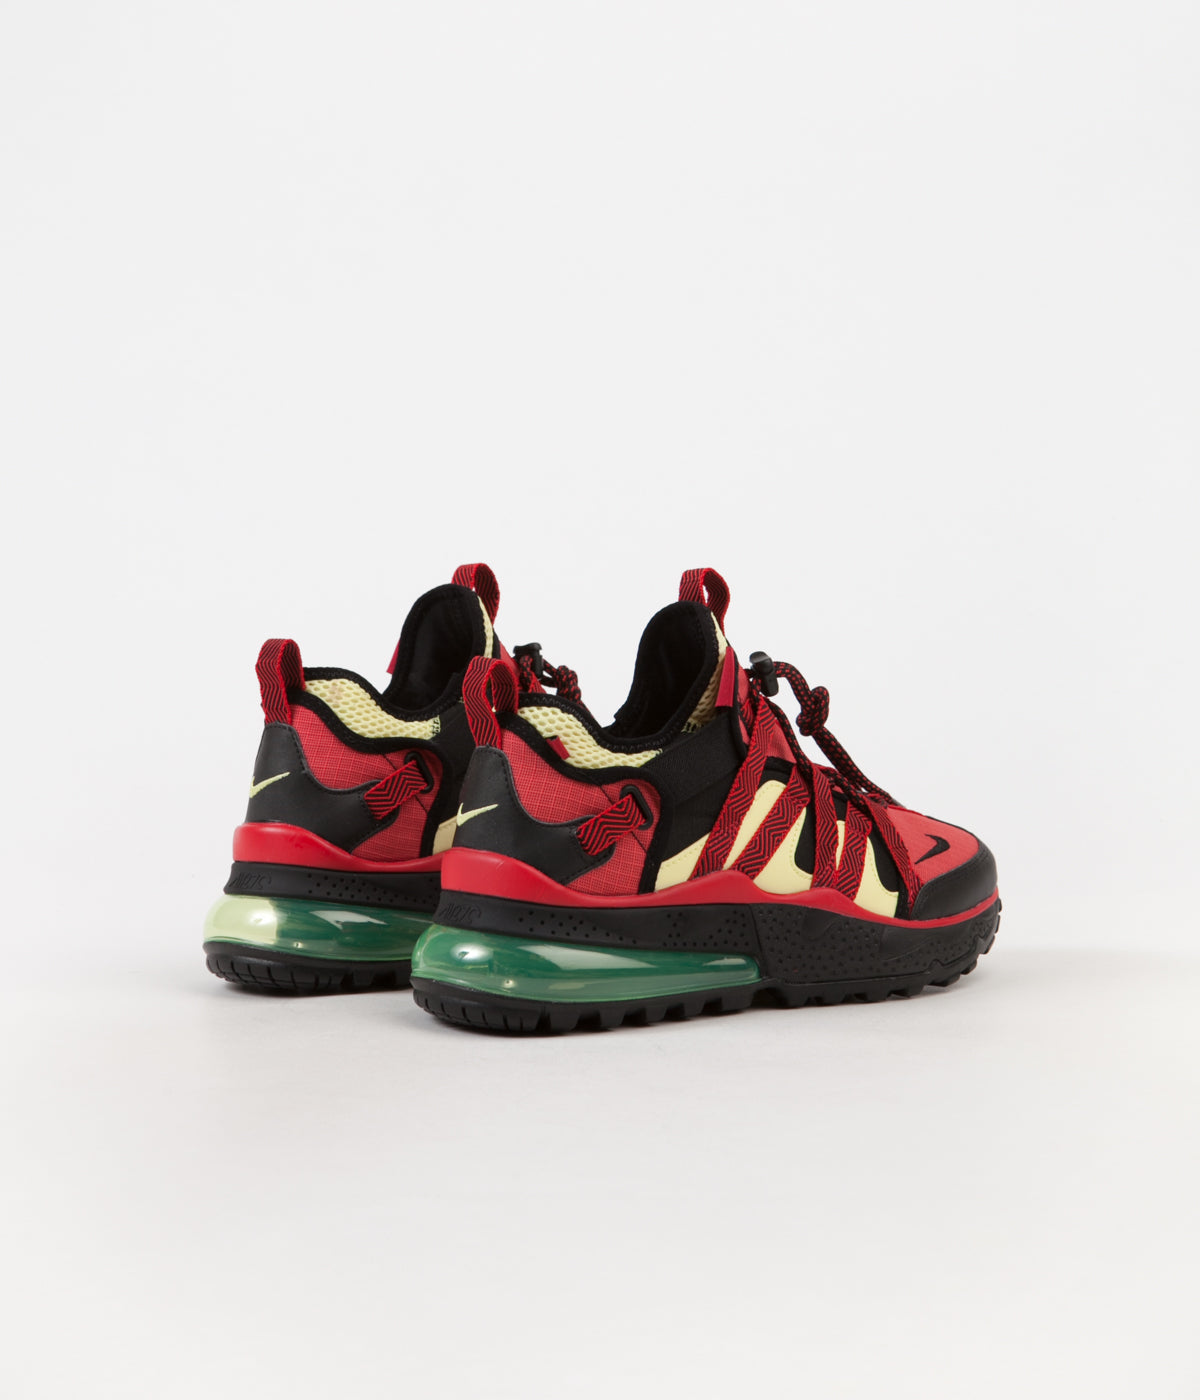 Nike Air Max 270 Bowfin Red AJ7200-003 Buy Online NOIRFONCE, 49% OFF